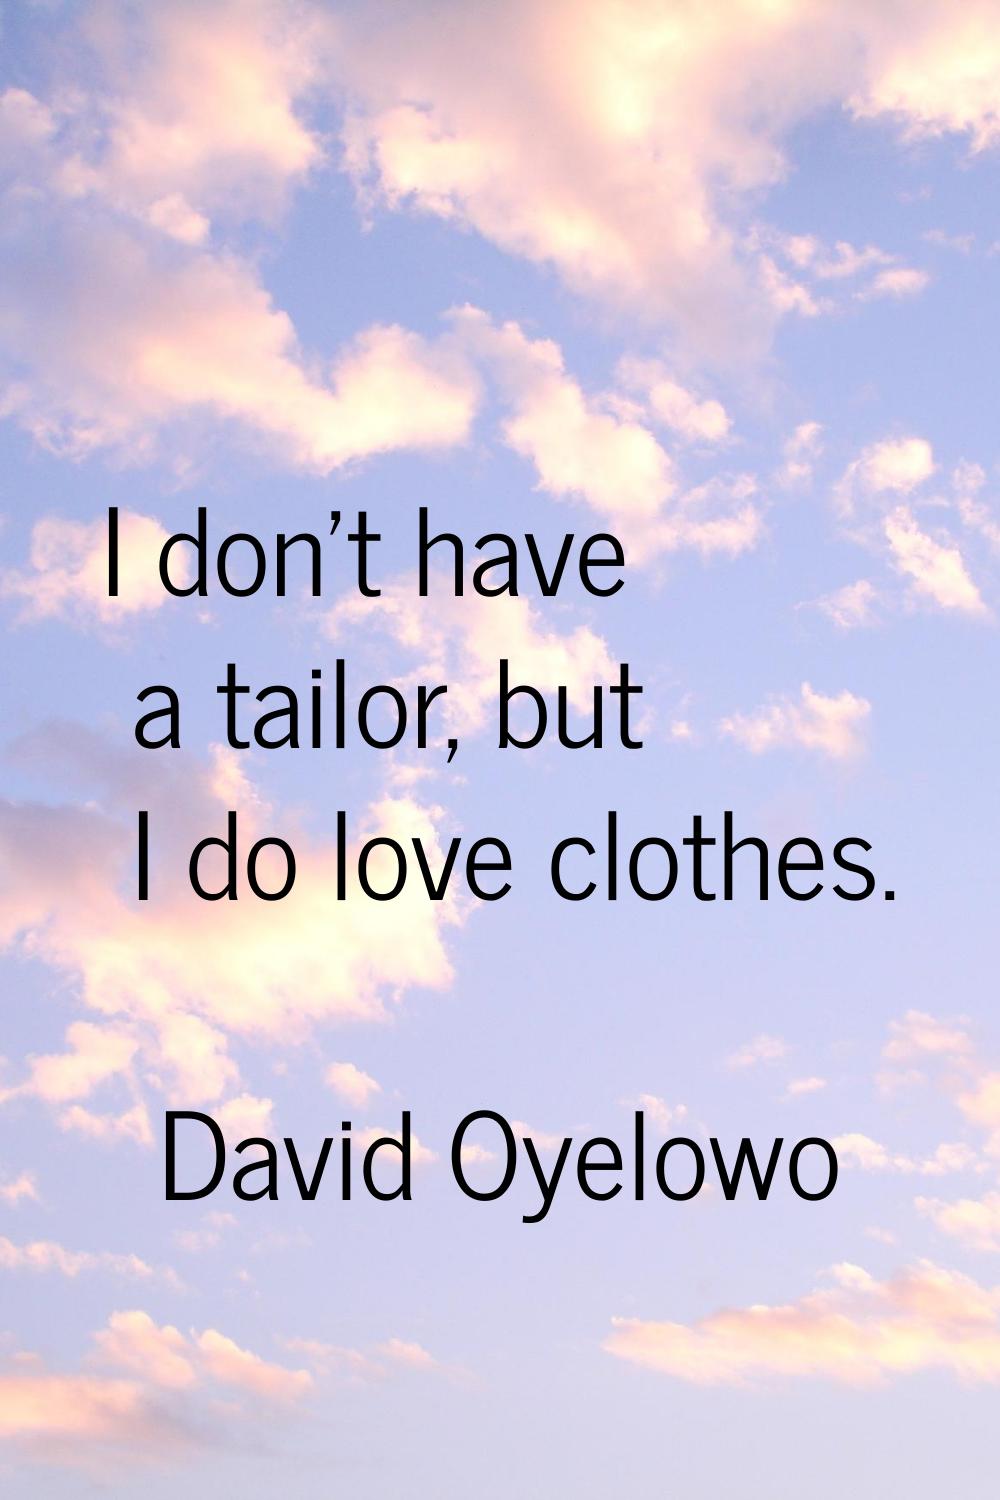 I don't have a tailor, but I do love clothes.